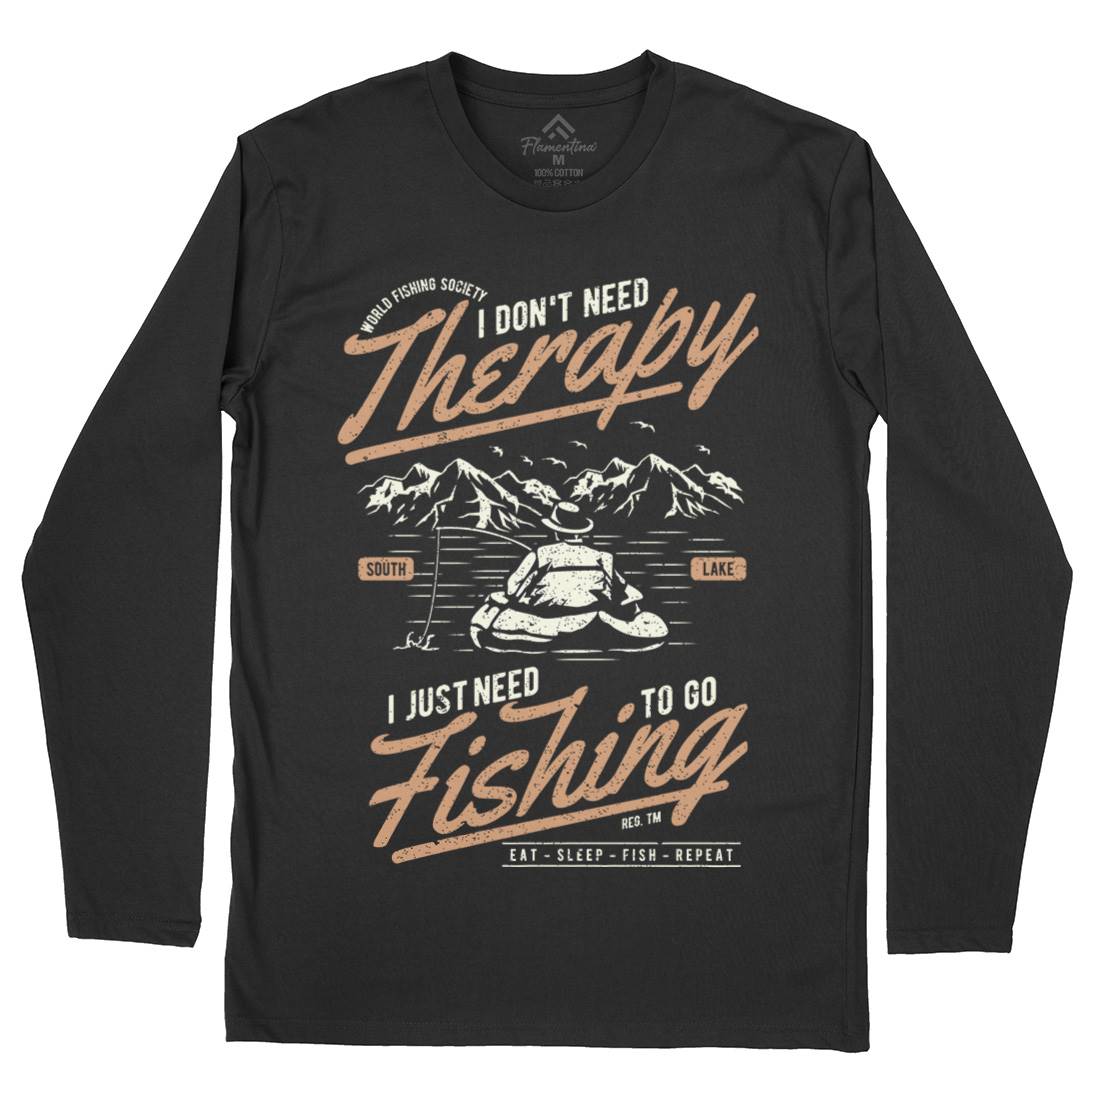 Therapy Mens Long Sleeve T-Shirt Fishing A662